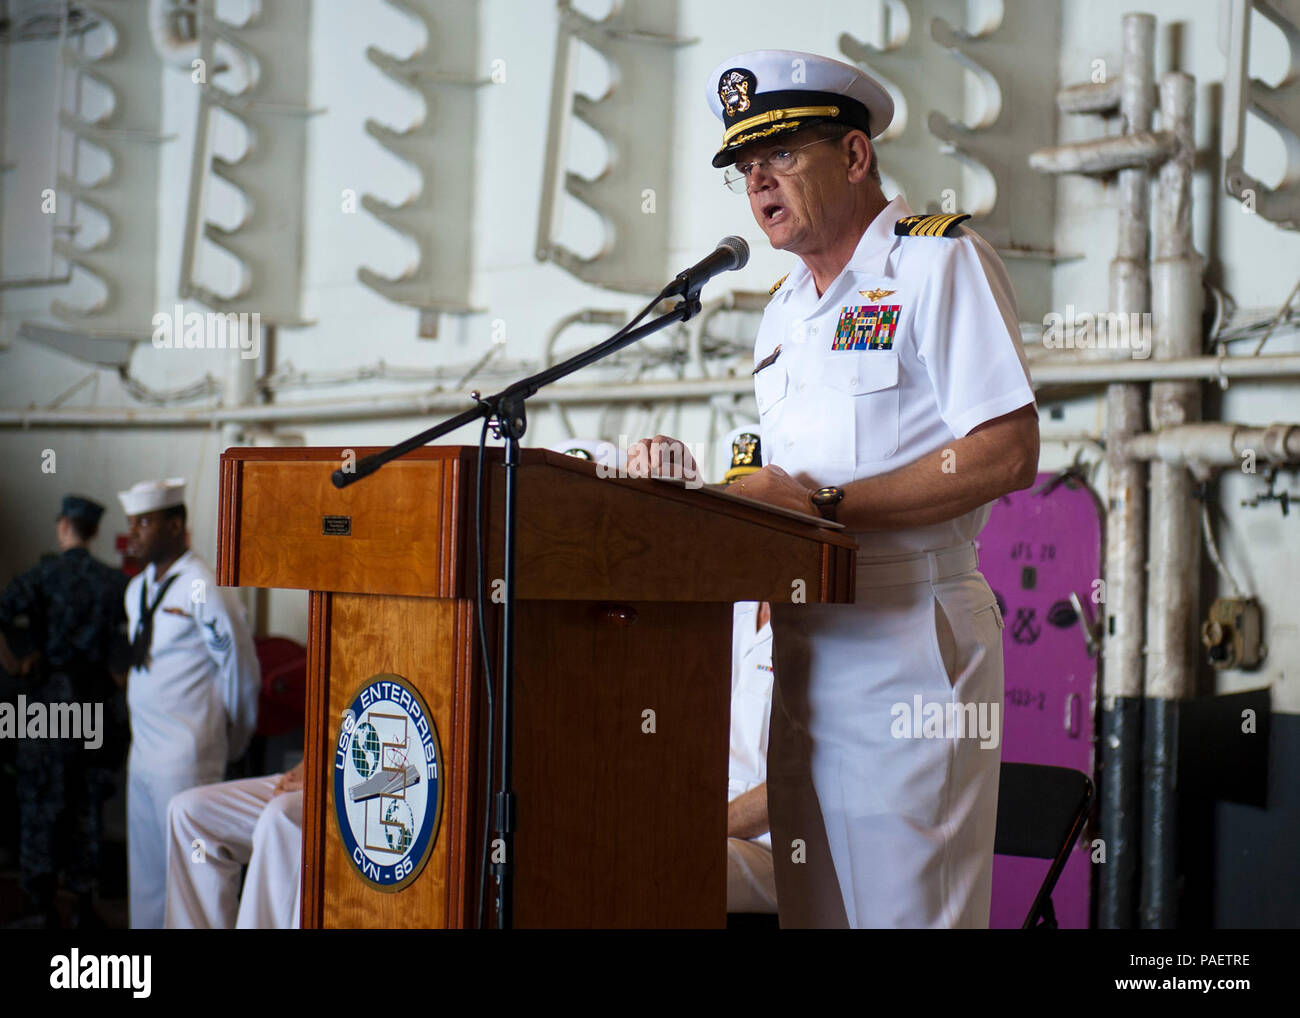 Capt. William C. Hamilton Jr., commanding officer of the aircraft carrier USS Enterprise (CVN 65), addresses the crew during a ceremony commemorating the Sept. 11, 2001, terrorist attacks. Enterprise is deployed to the U.S. 5th Fleet area of responsibility conducting maritime security operations, theater security cooperation efforts and support missions as part of Operation Enduring Freedom. Terrorists hijacked four passenger aircraft Sept. 11, 2001. Two of the aircraft were deliberately crashed into the World Trade Center in New York; one was crashed into the Pentagon; the fourth crashed near Stock Photo